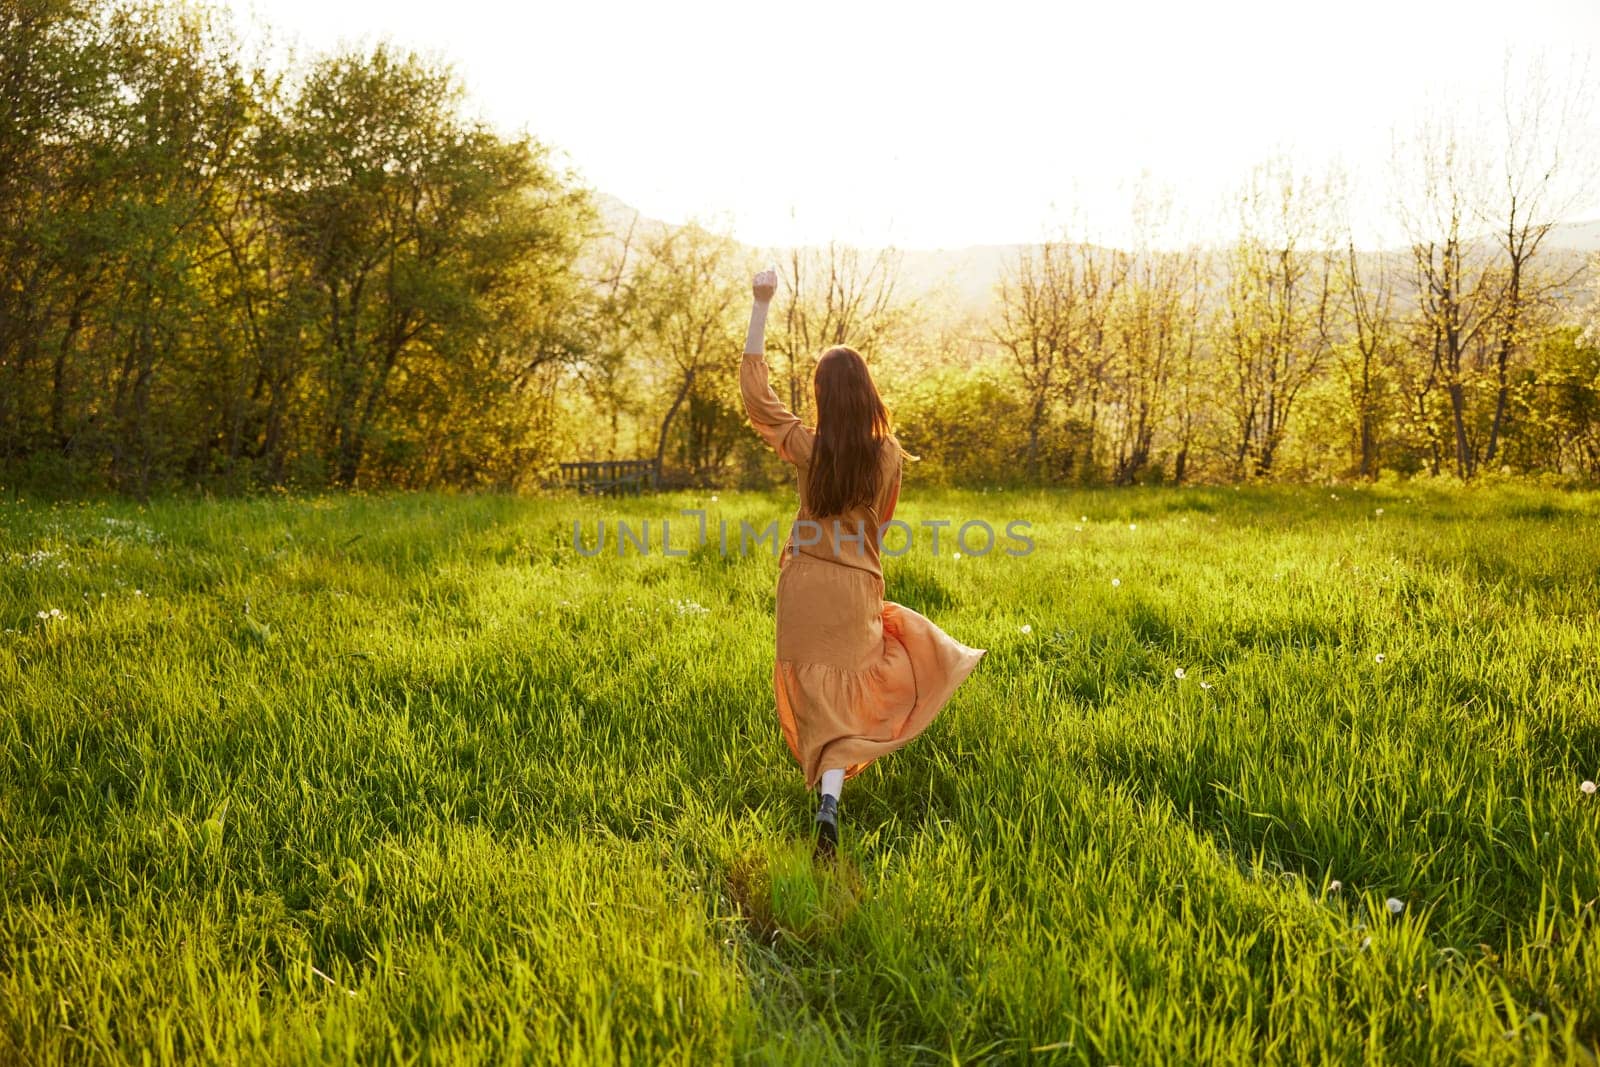 a relaxed slender woman enjoys the sunset standing in a green field with tall grass in an orange dress with her back to the camera, in warm summer weather. Horizontal photo by Vichizh